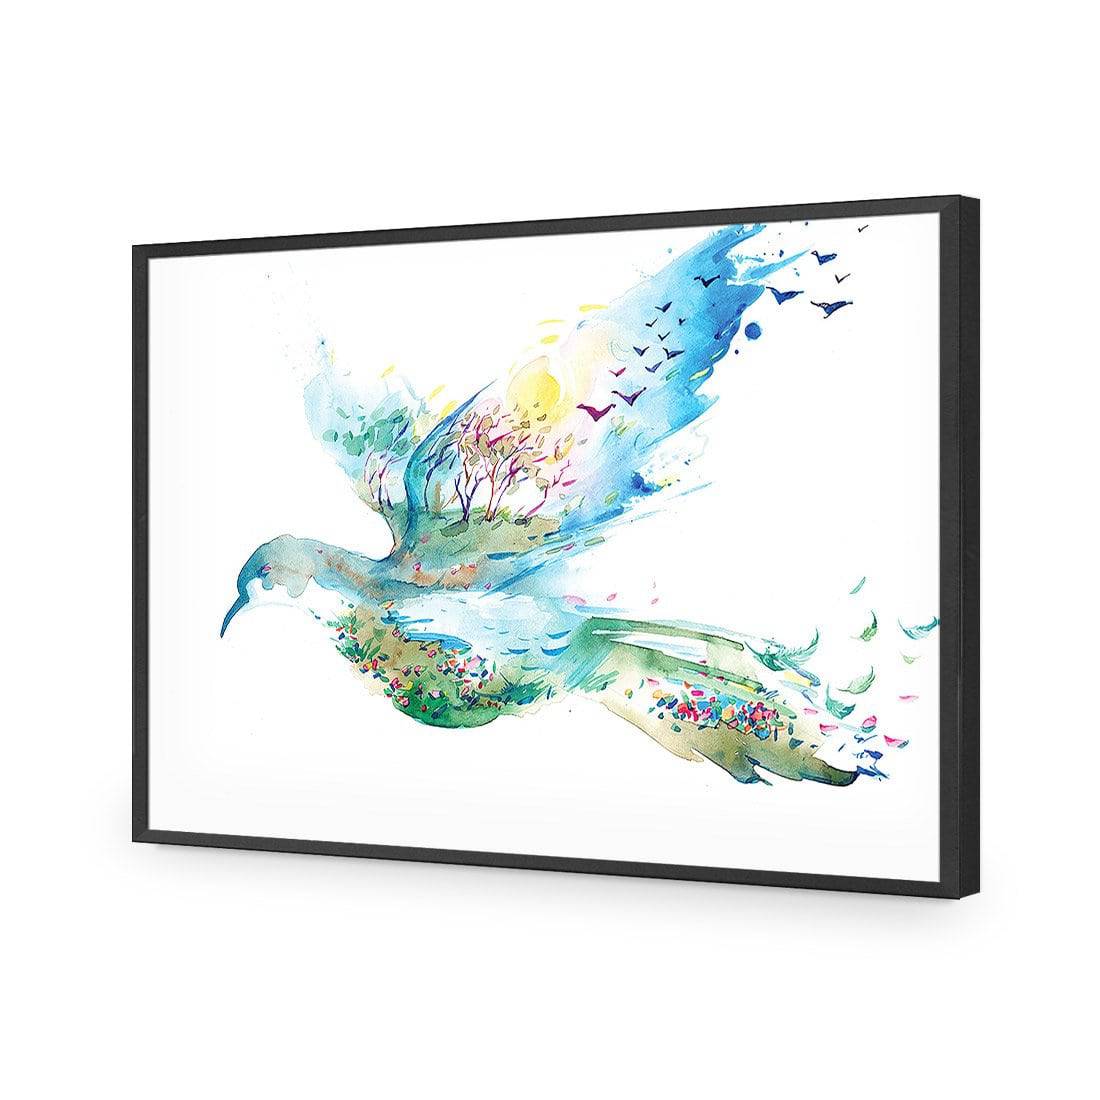 Dove Of Peace-Acrylic-Wall Art Design-Without Border-Acrylic - Black Frame-45x30cm-Wall Art Designs